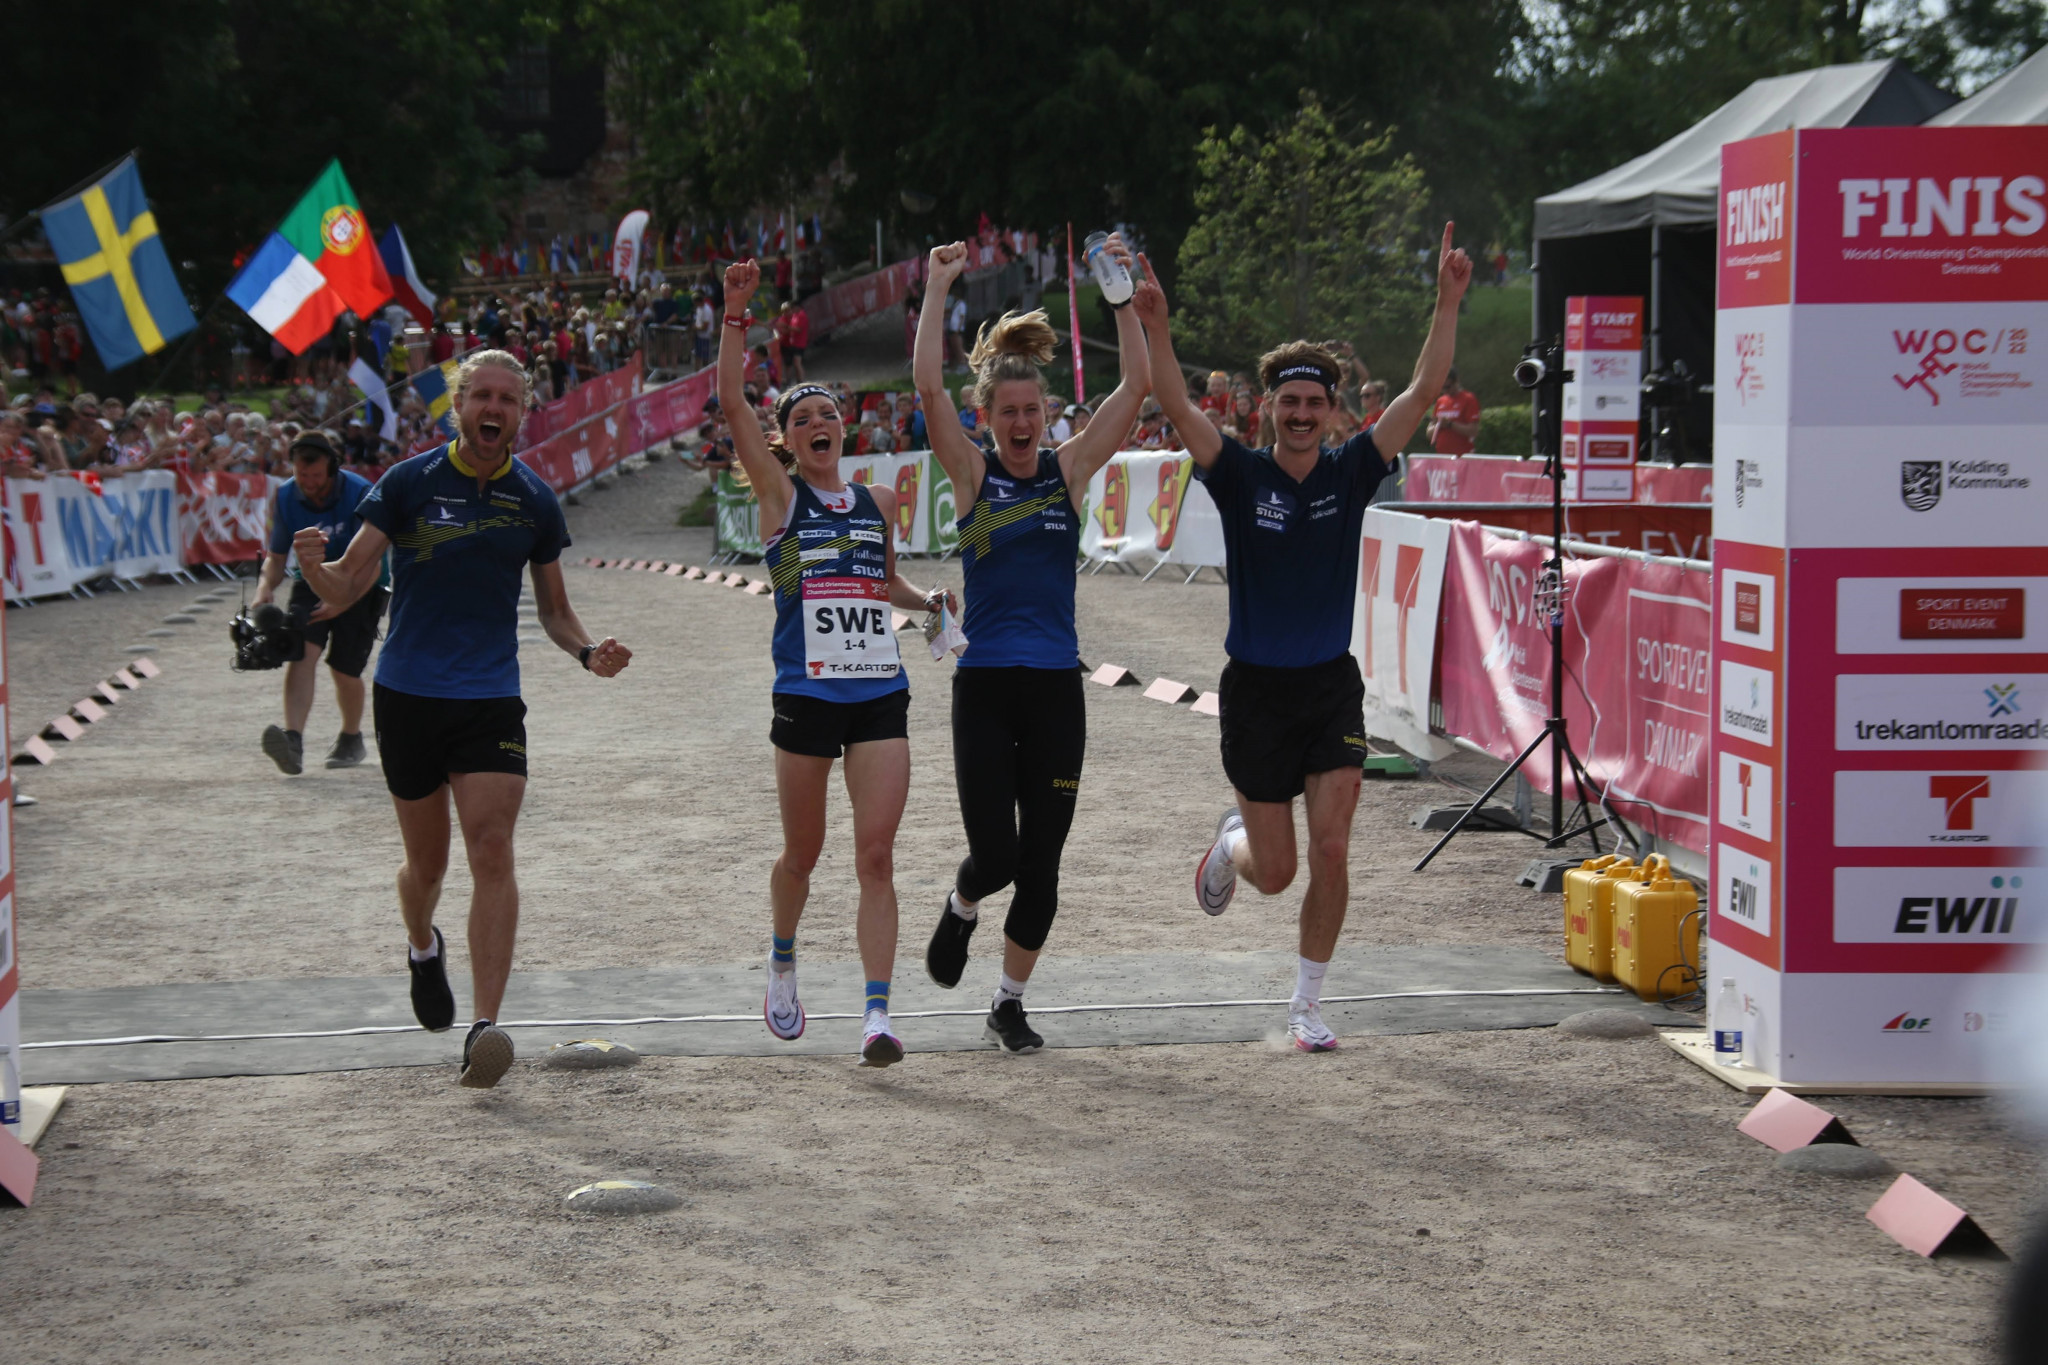 Sweden overcome Britain to win sprint relay gold at World Orienteering Championships